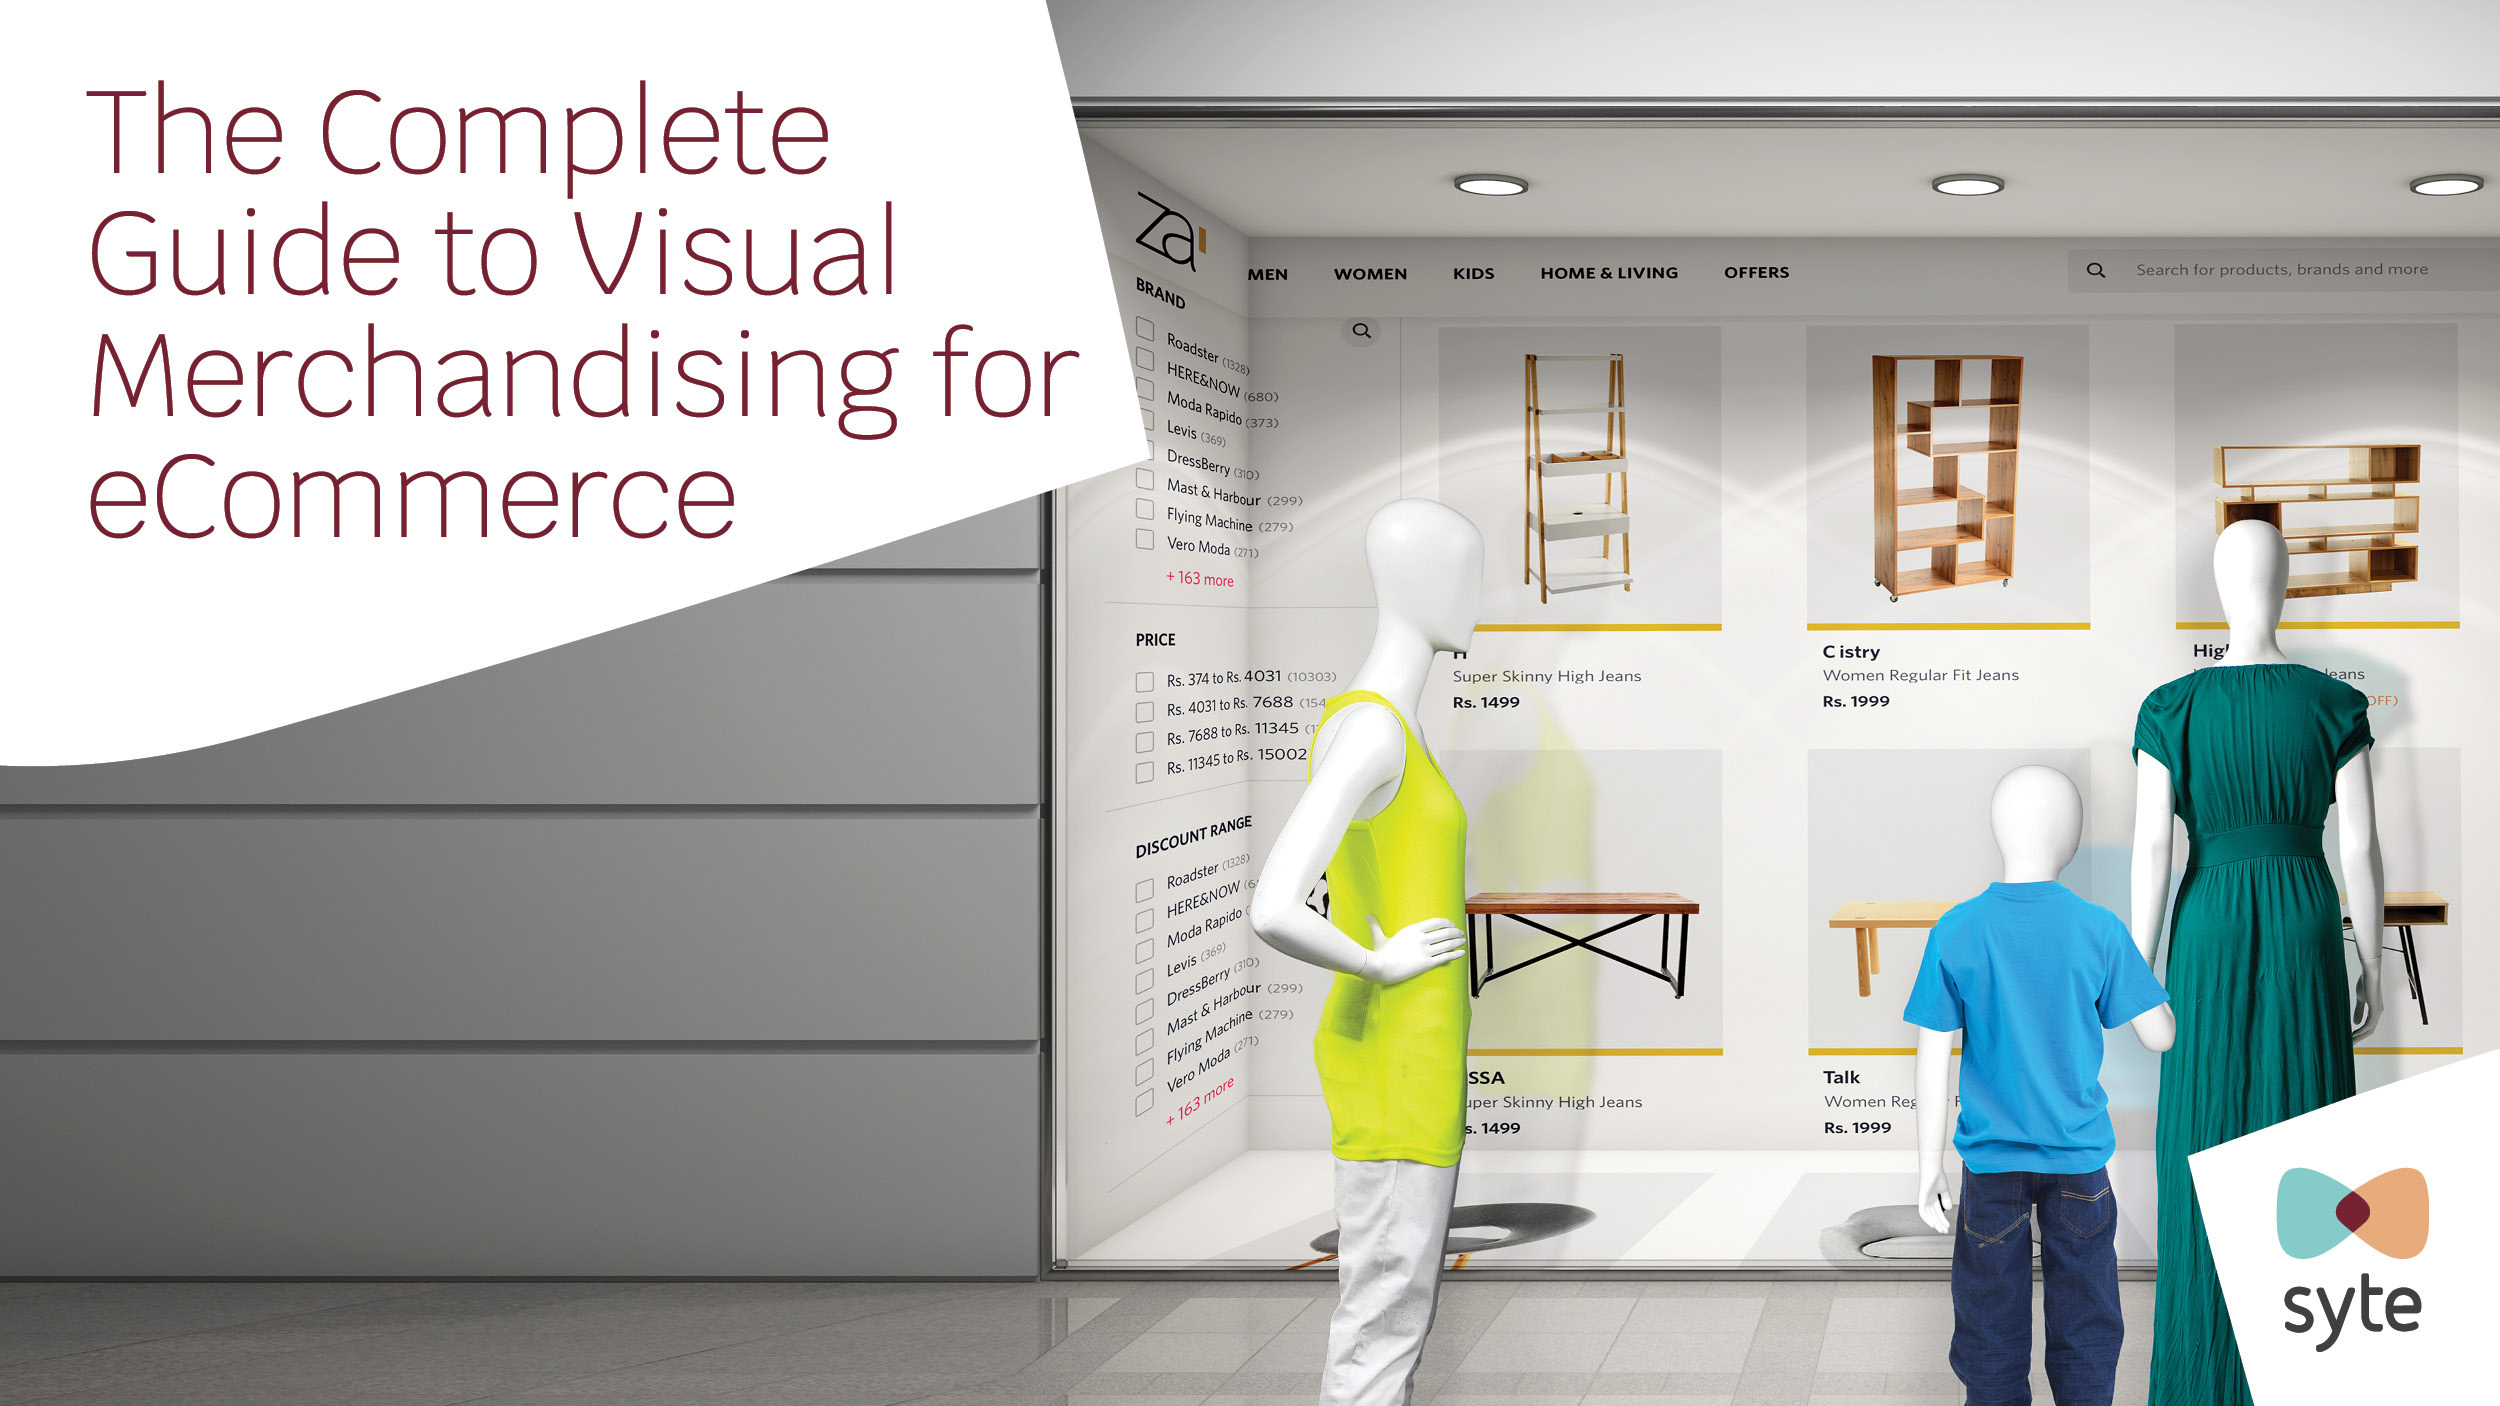 The Complete Guide to Online Visual Merchandising